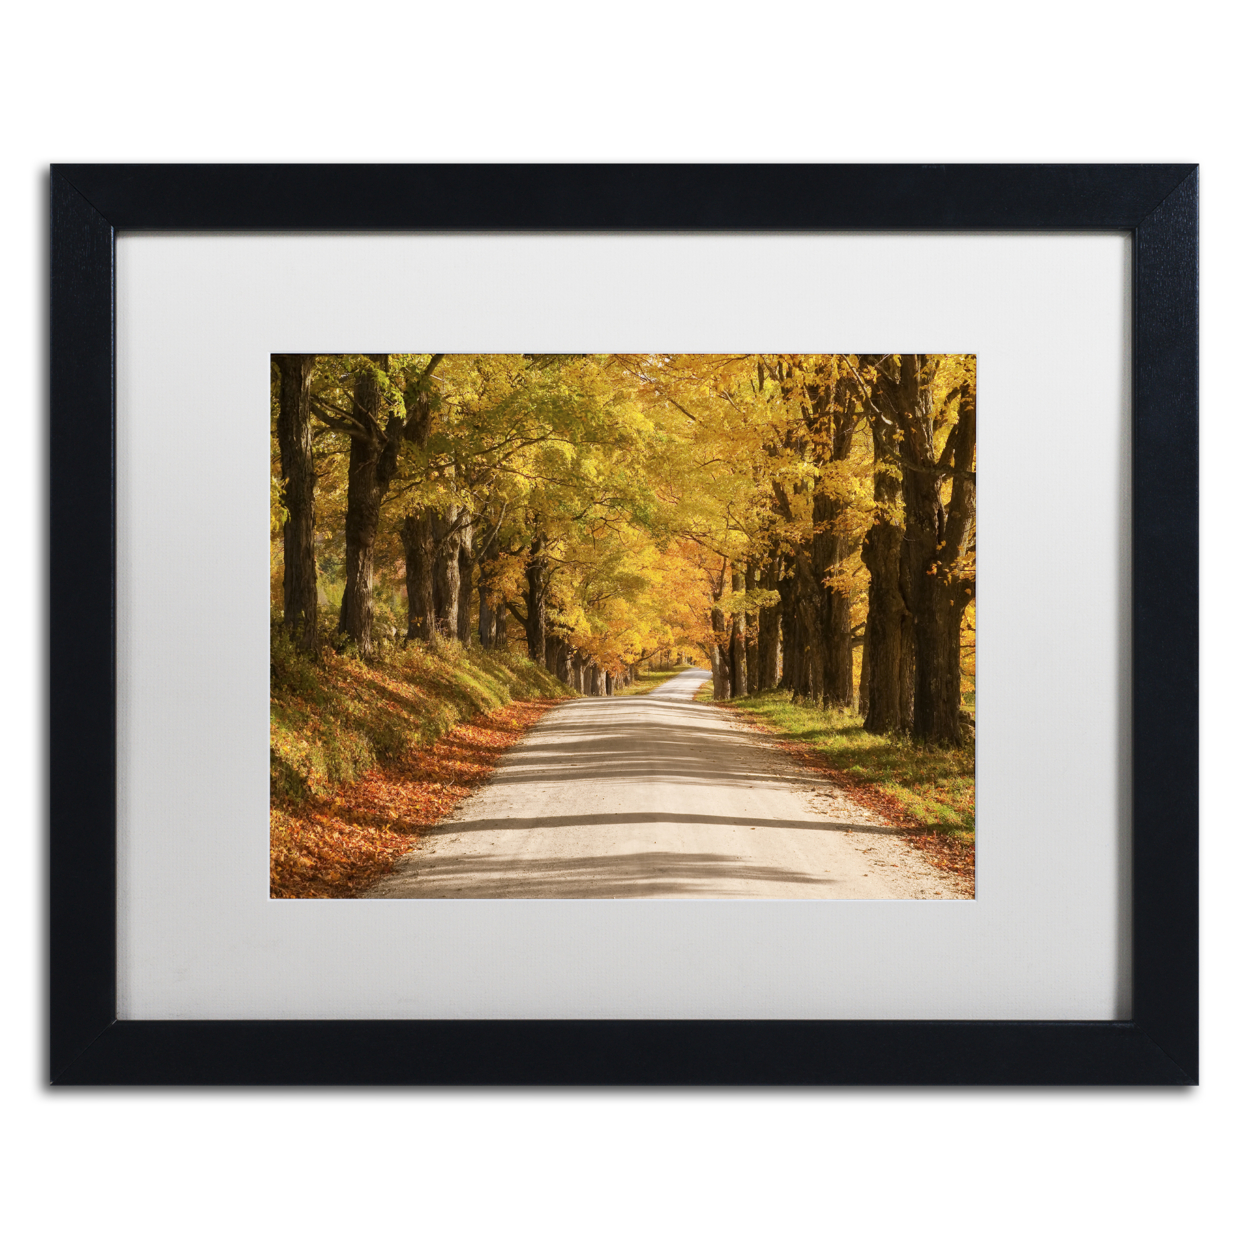 Michael Blanchette Photography 'Maple Canopy' Black Wooden Framed Art 18 X 22 Inches